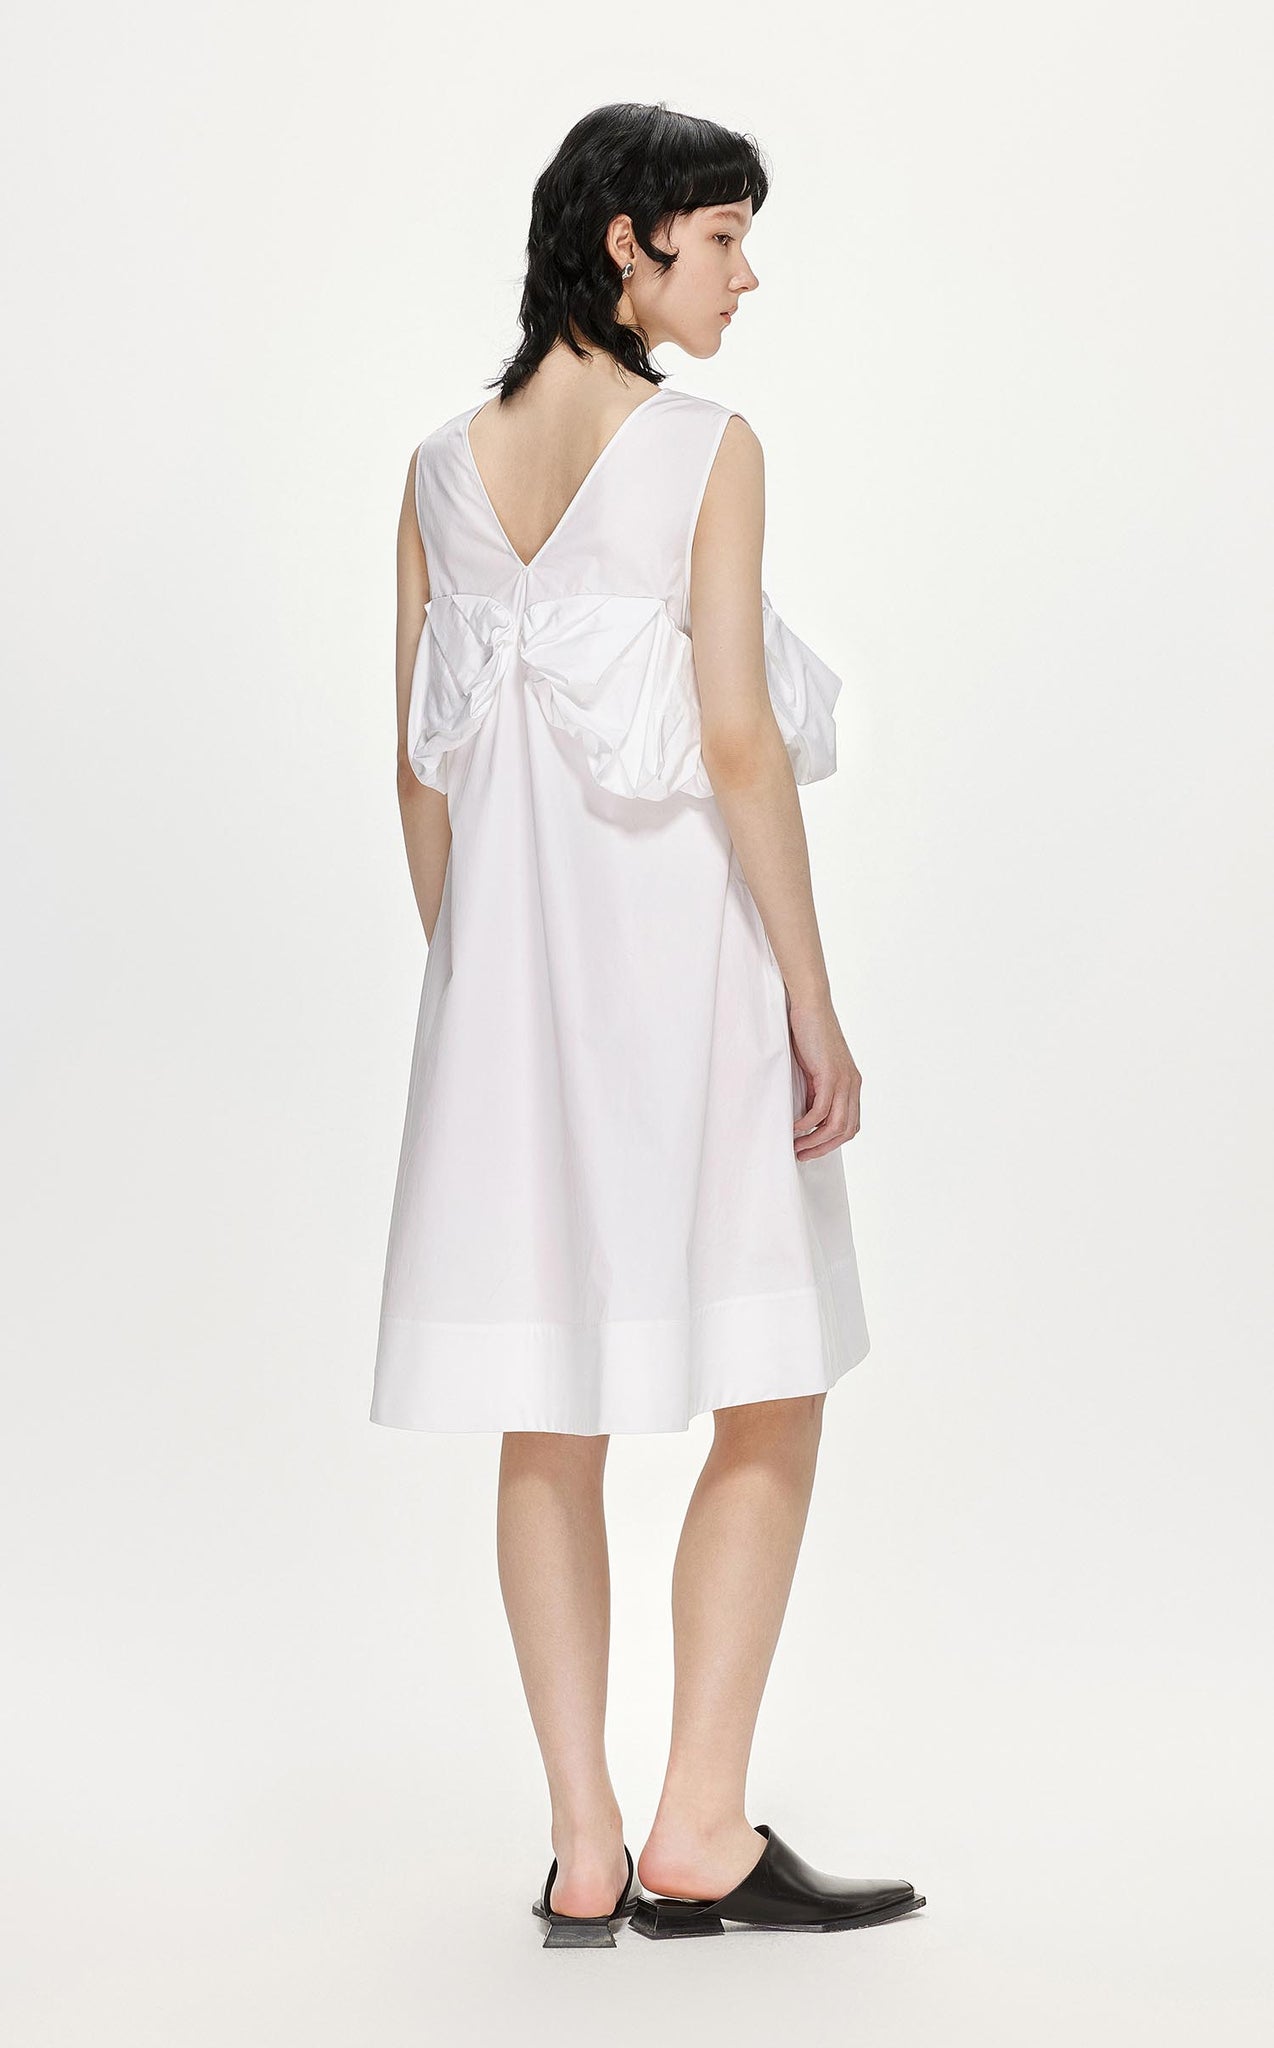 Dresses / JNBY Solid A-Line Sleeveless Dress (100% Cotton)